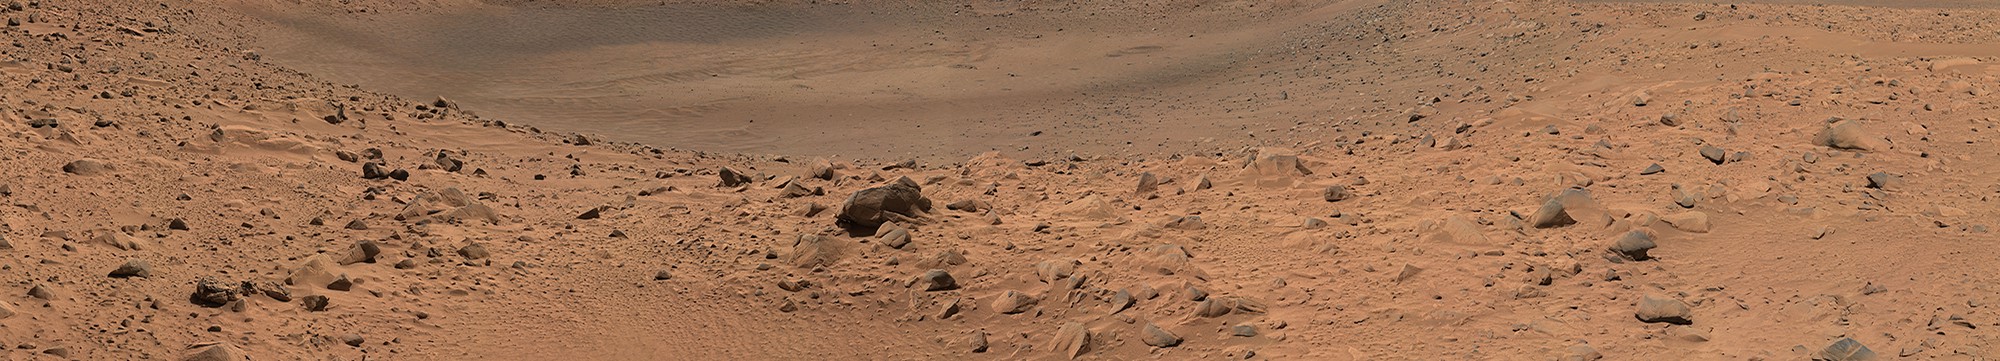 A photo from the surface of Mars, showing boulders and stones in a valley depression.